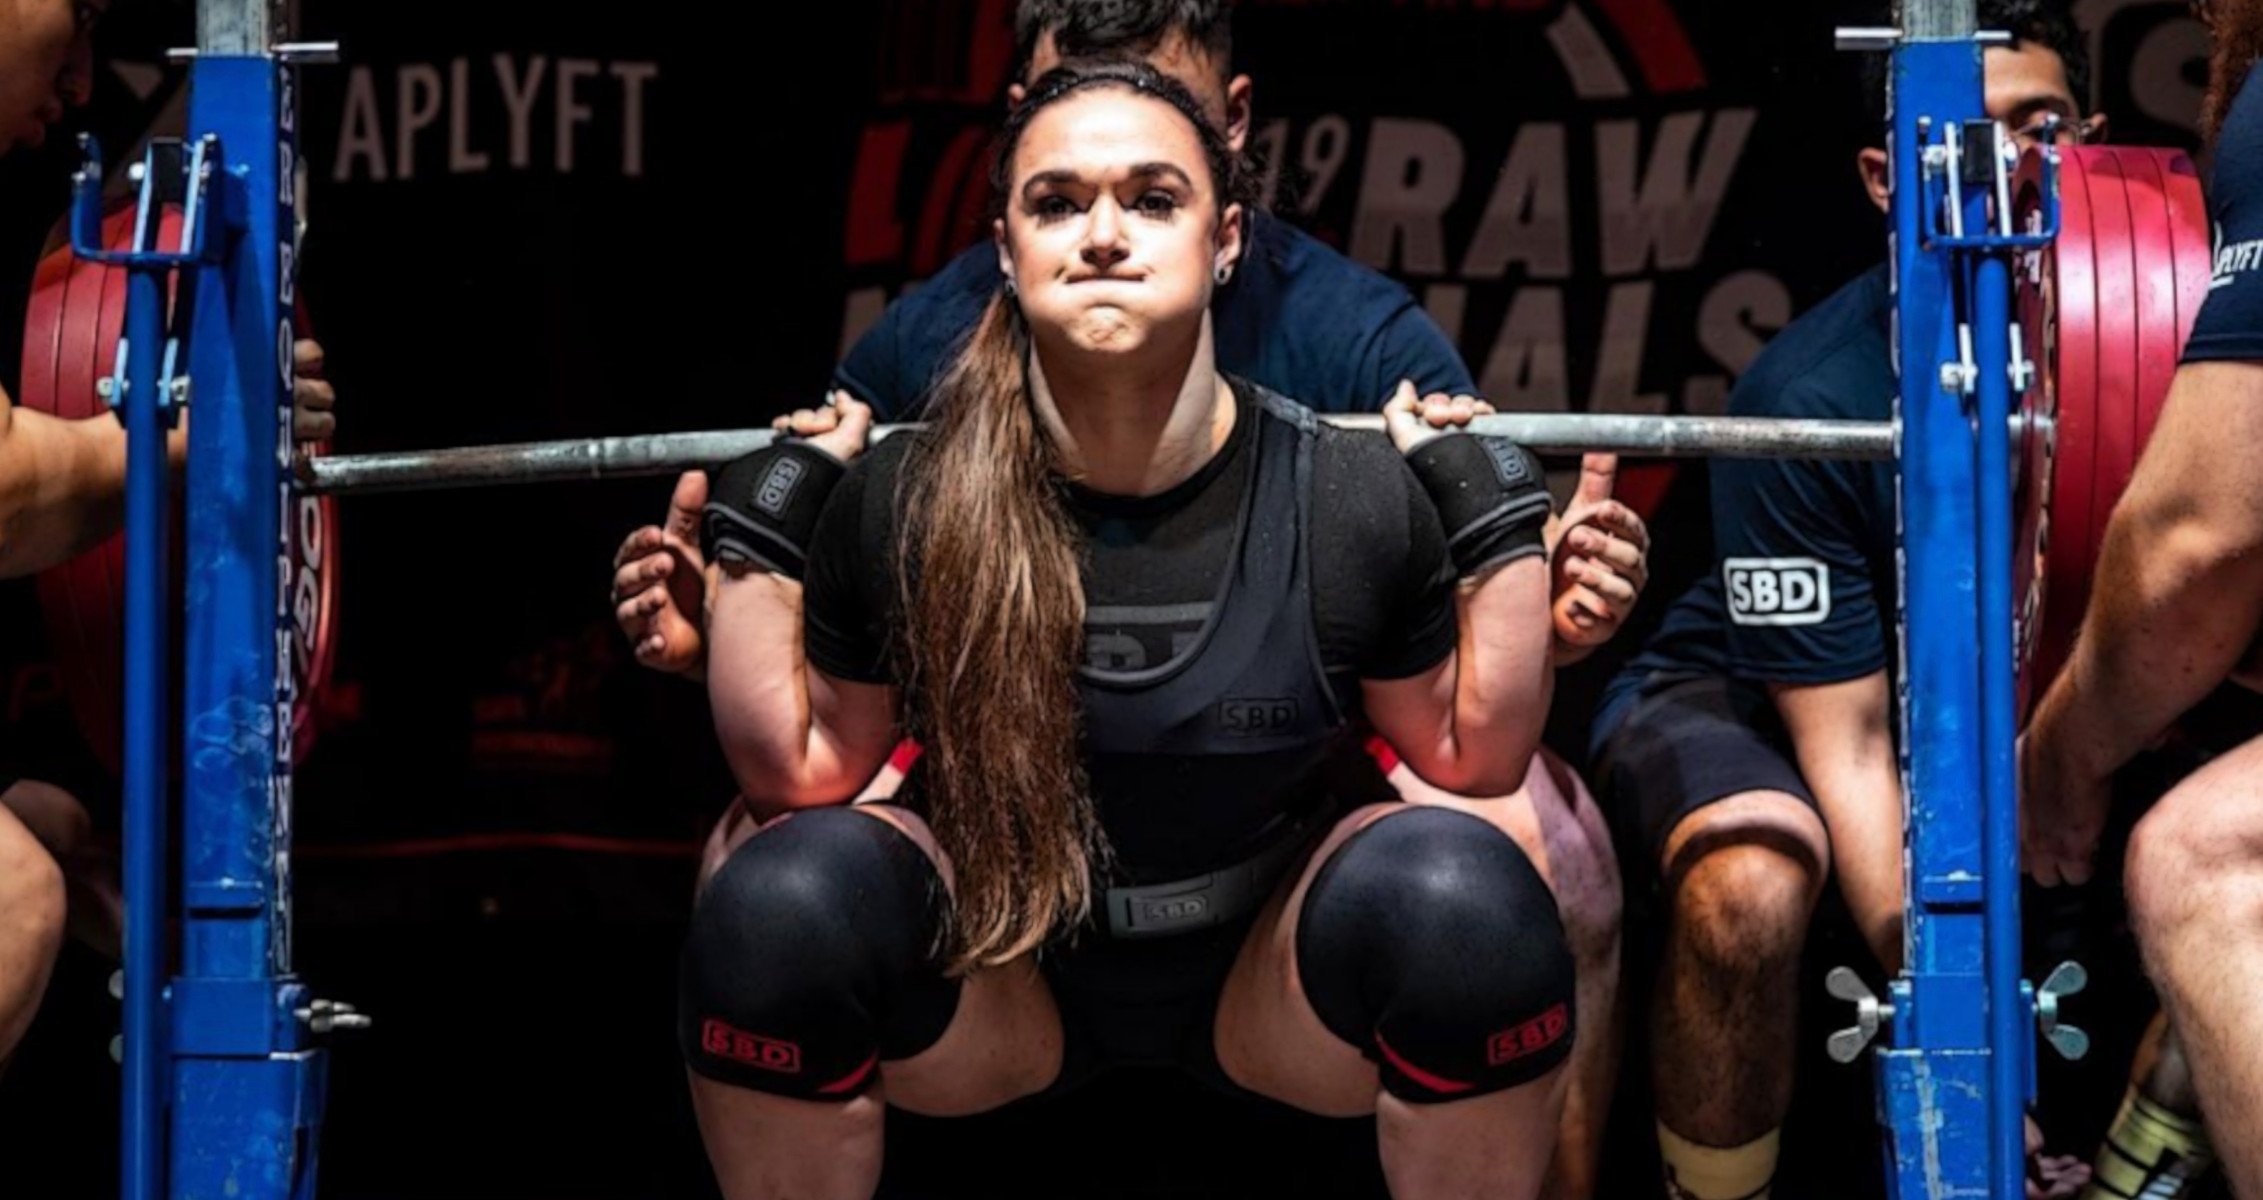 ipf-world-champion-amanda-lawrence-shows-insane-strength-in-the-big-3-lifts